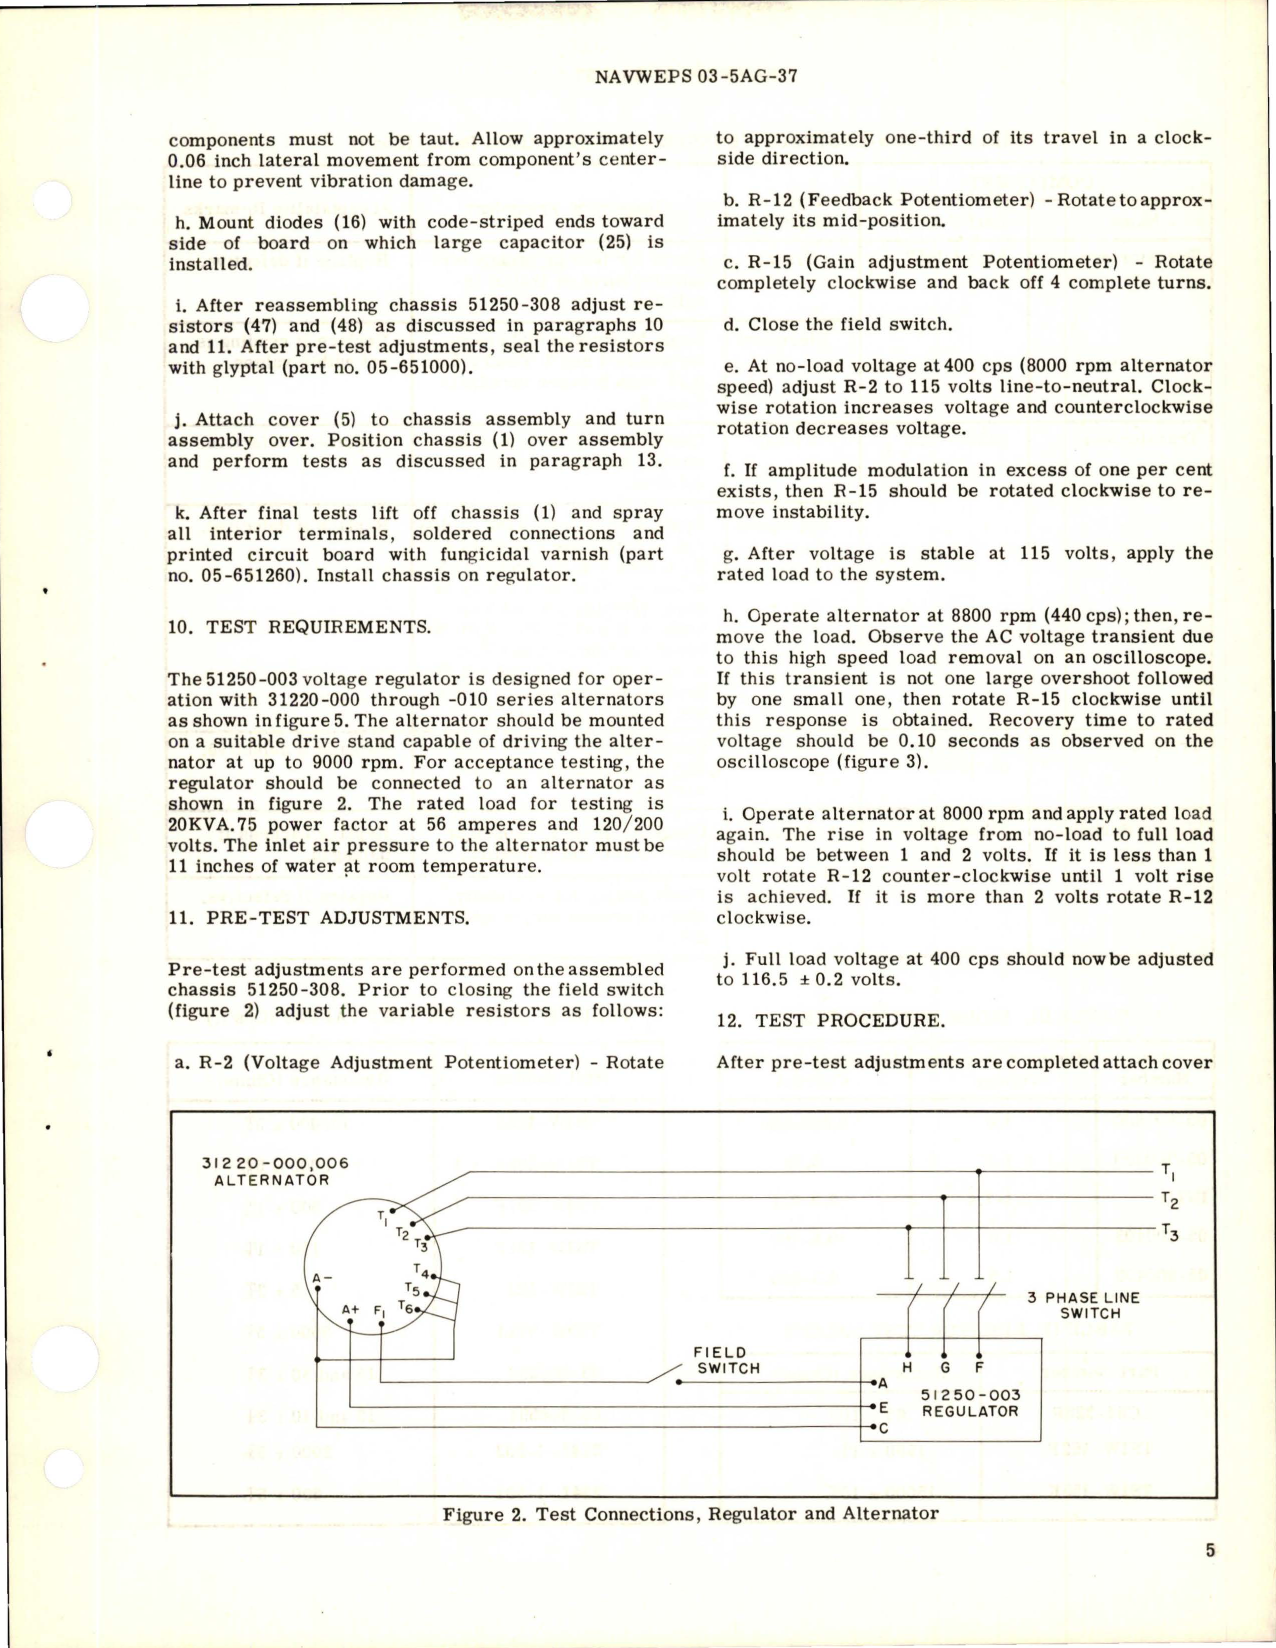 Sample page 7 from AirCorps Library document: Overhaul Instructions with Parts Breakdown for Voltage Regulator - Models 51250-003 and R6110-777-0092-ZJHA